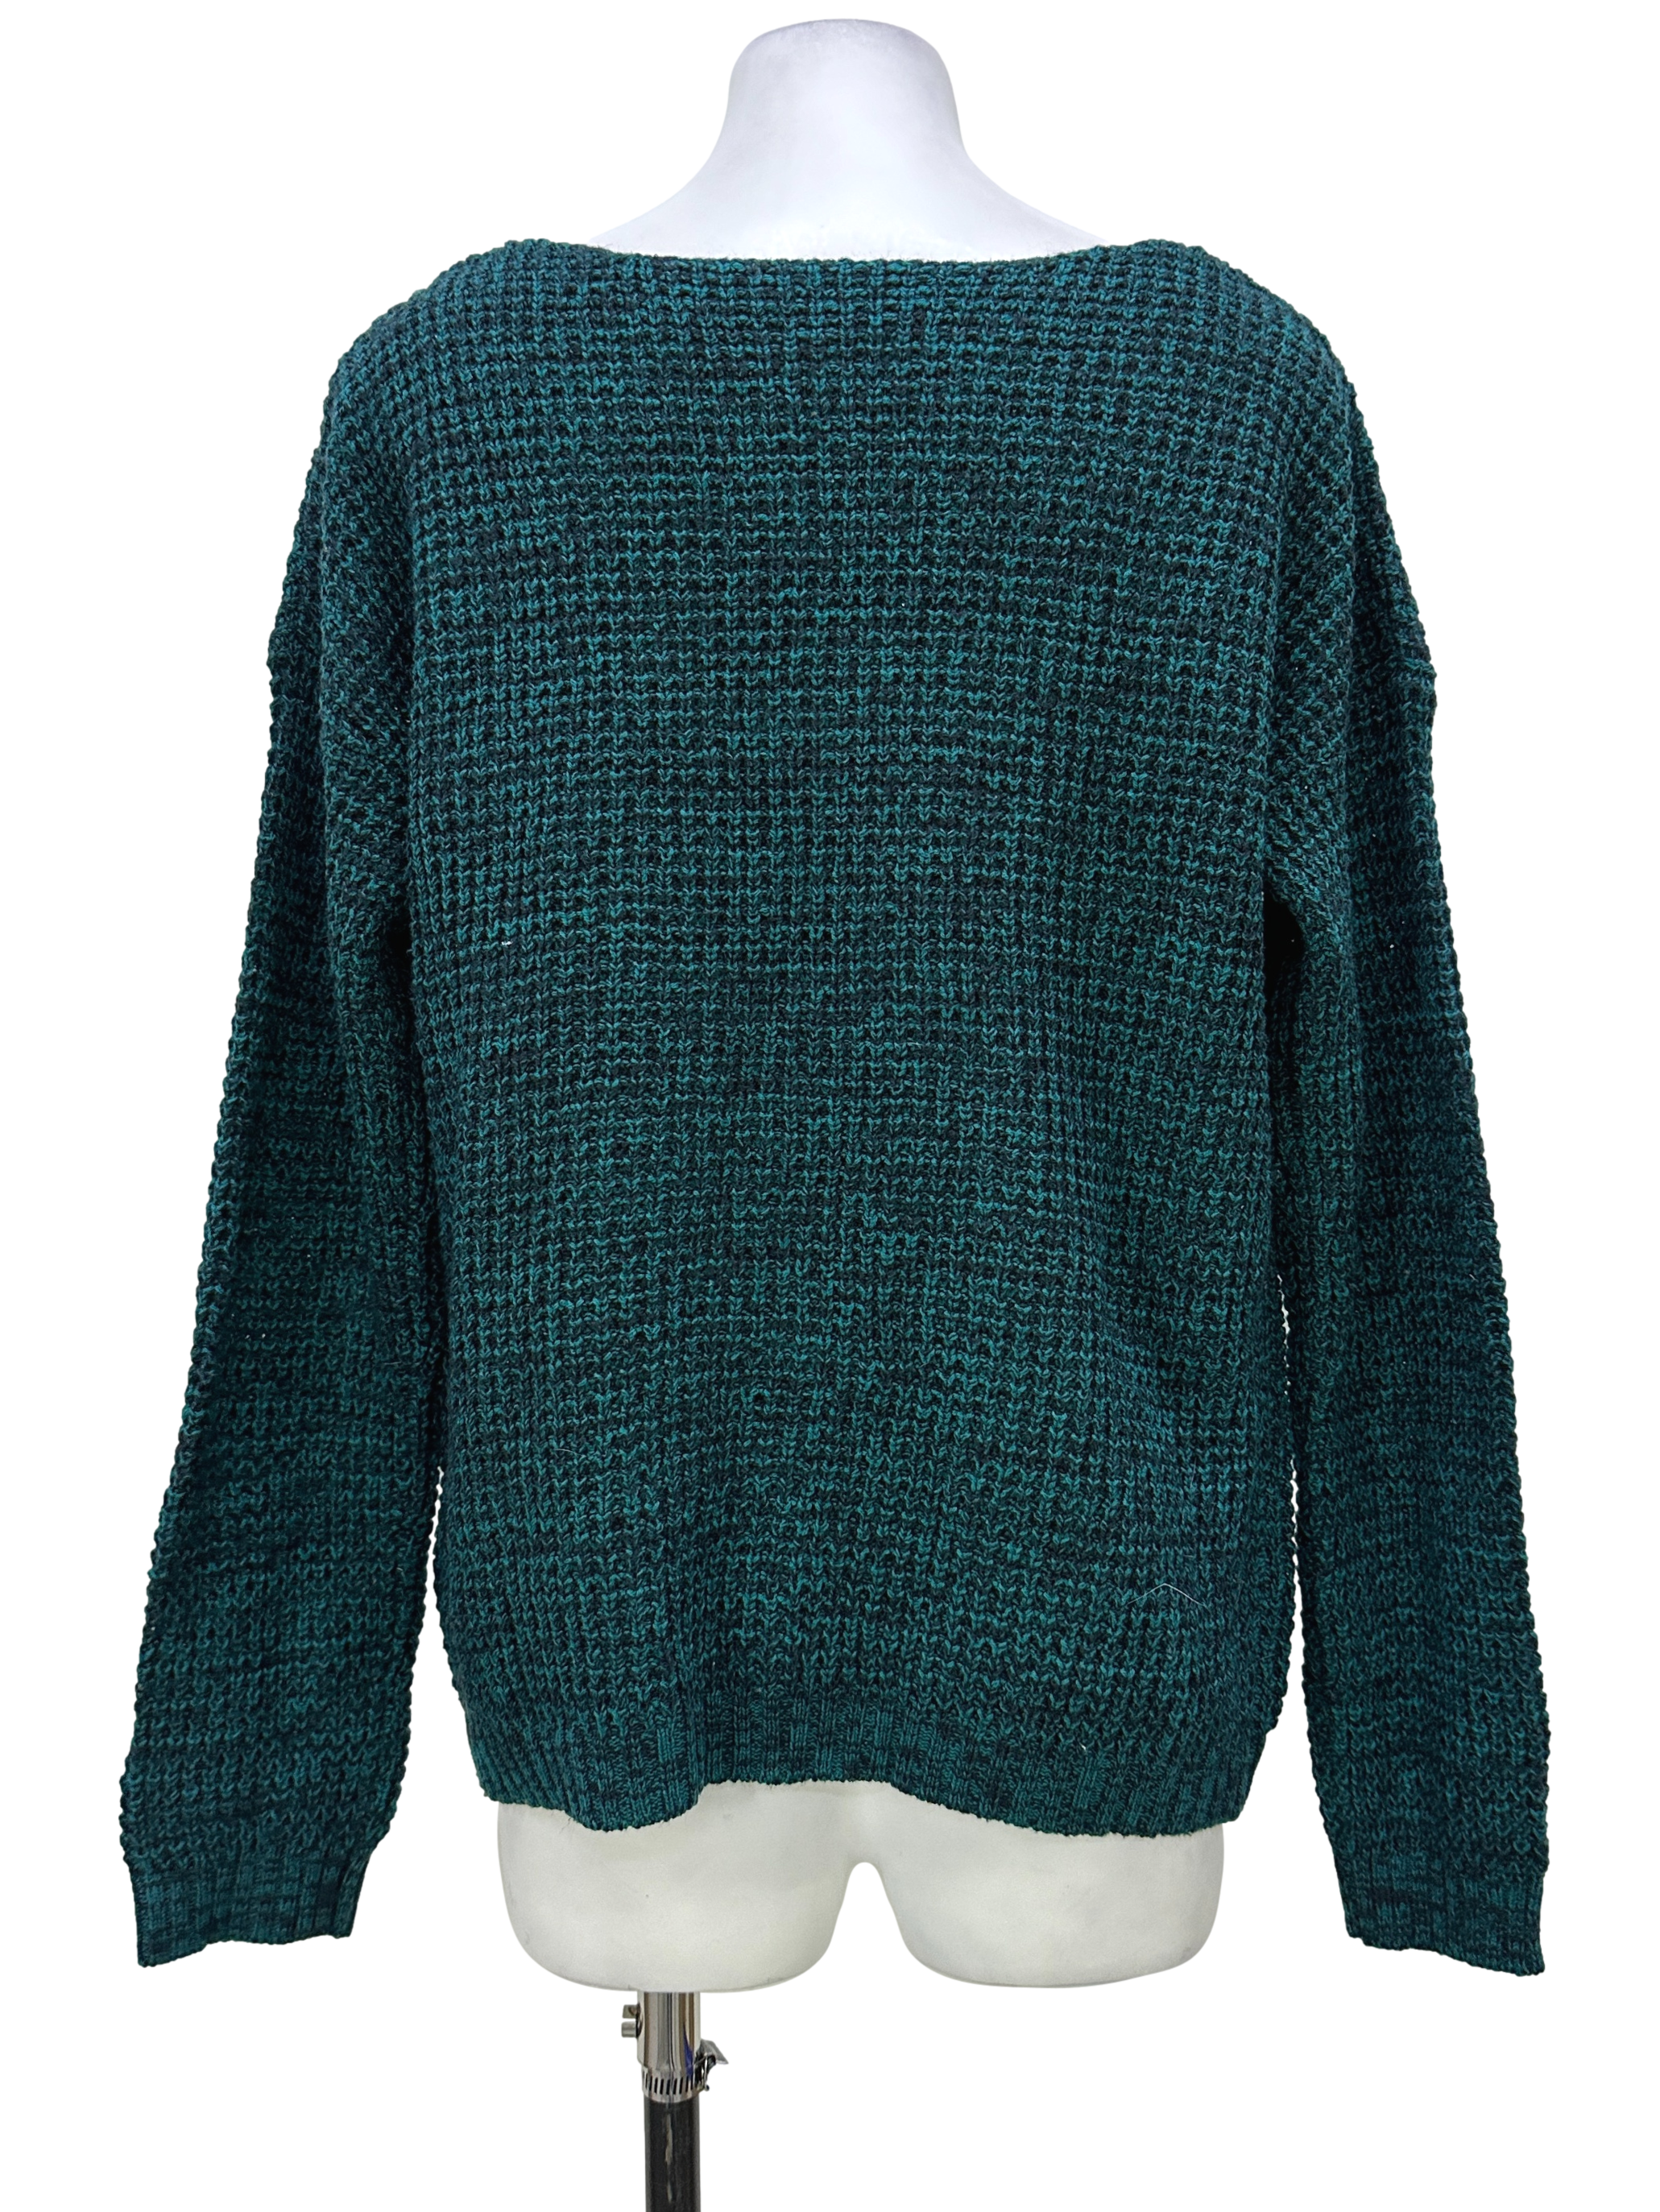 Turquoise And Black Cable Knit Sweater